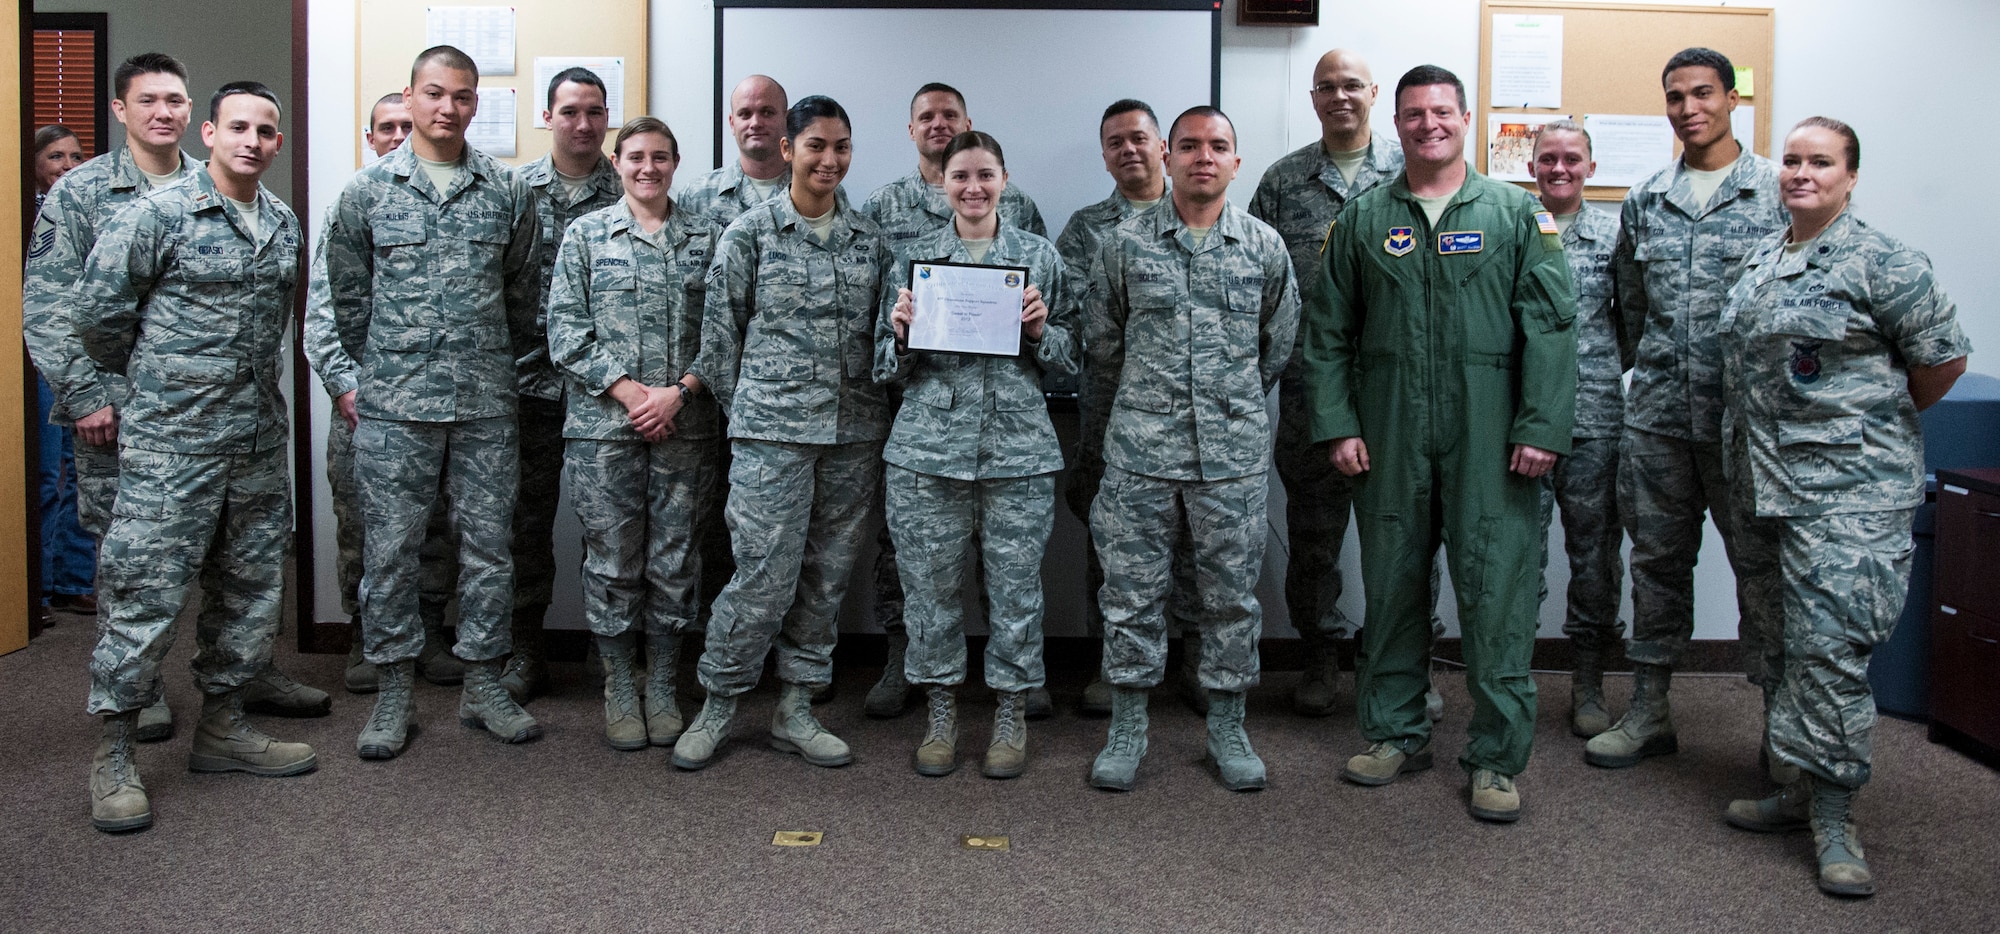 Members of Laughlin’s 47th Operations Support Squadron pose for a photo after receiving an award for being the top power producers in the “Sweat for Power” competition Nov. 13, 2012. The 47th OSS generated 900 watt-hours of power on five retrofitted elliptical machines at the Losano Fitness Center at Laughlin Air Force Base, Texas. The competition was one of the many activities the 47th Civil Engineer Squadron sponsored as part of Laughlin's 2012 Energy Action Month. (U.S. Air Force photo/Airman 1st Class Nathan Maysonet)